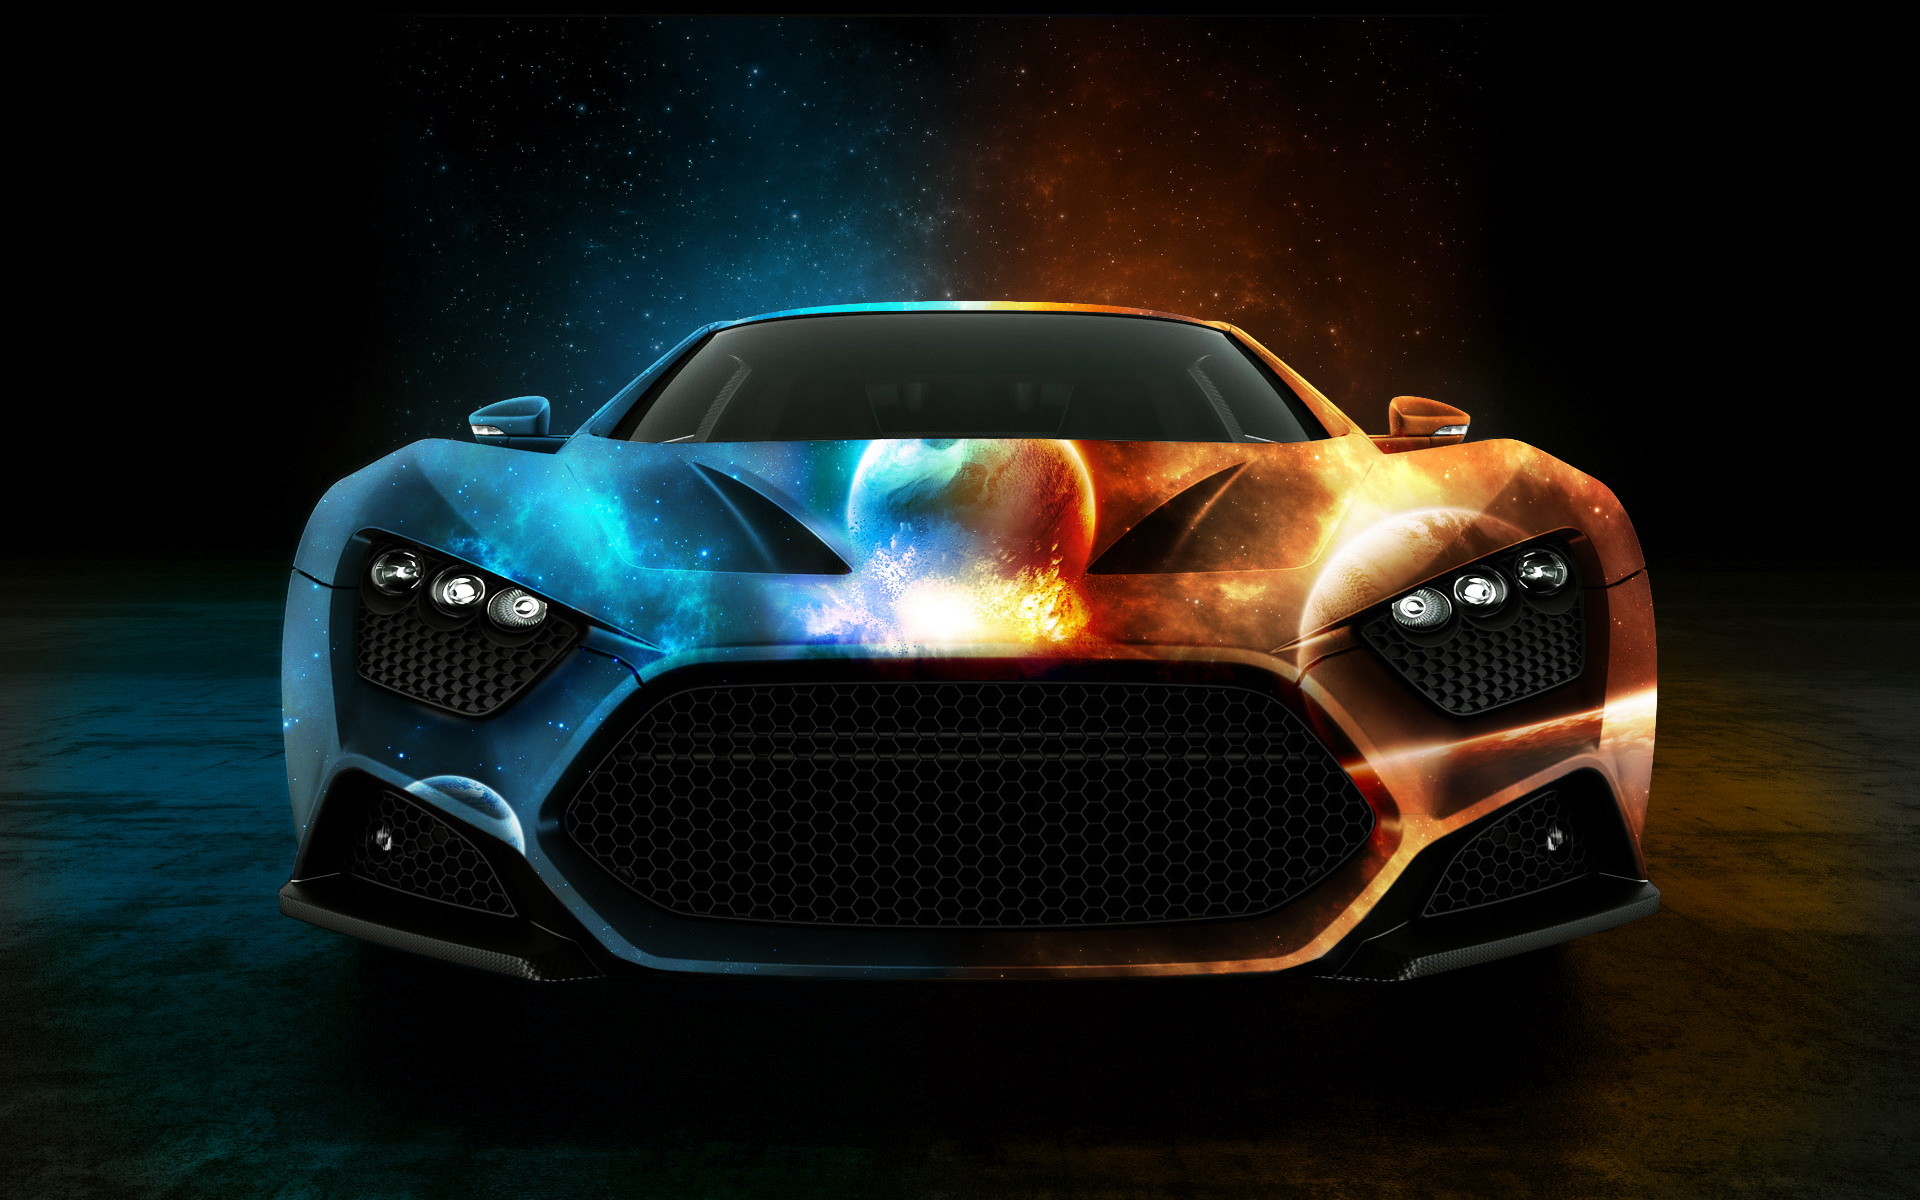 1920x1200 pixel desktop wallpapers really cool backgrounds for tumblr Car .